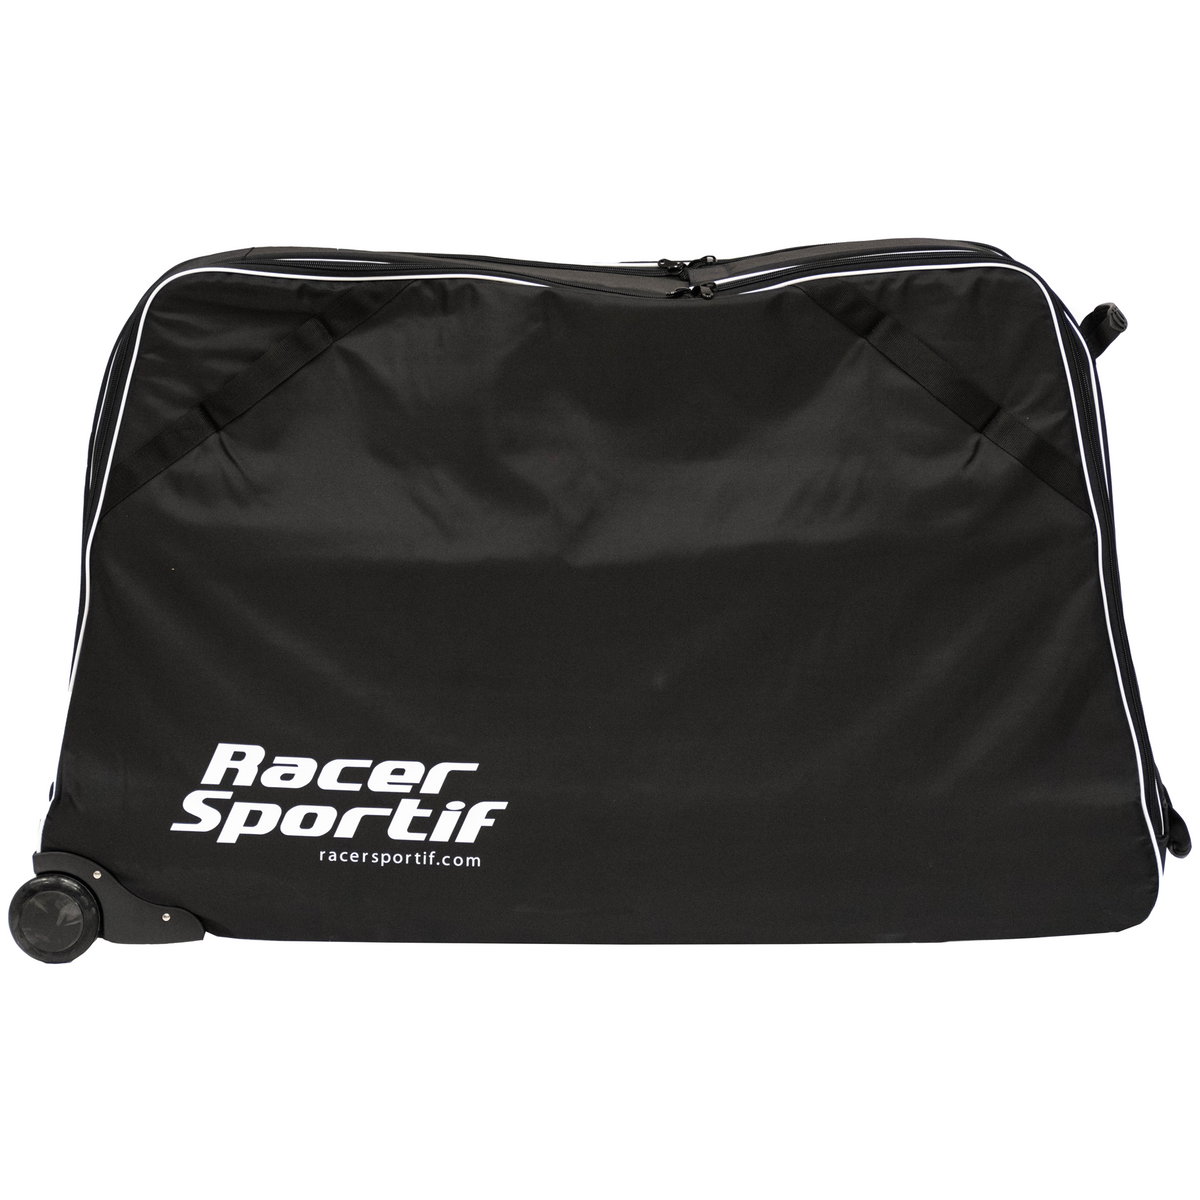 Racer Sportif Soft Shell Bicycle Travel Case - Racer Sportif